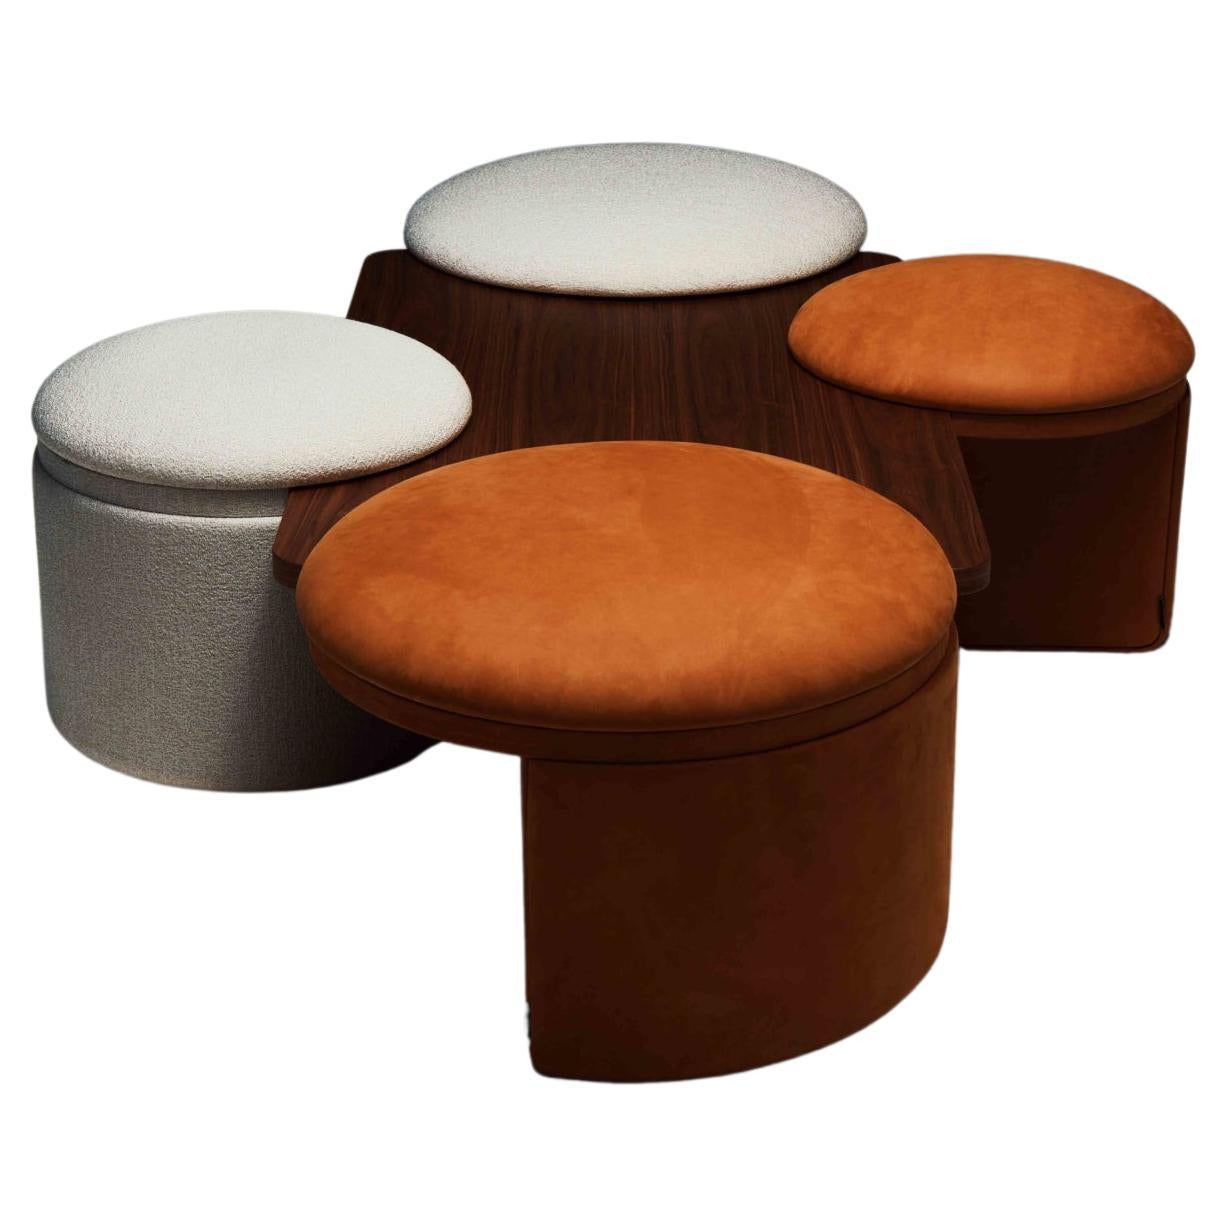 Amazone Composed by 4 Pouf by Atelier oï